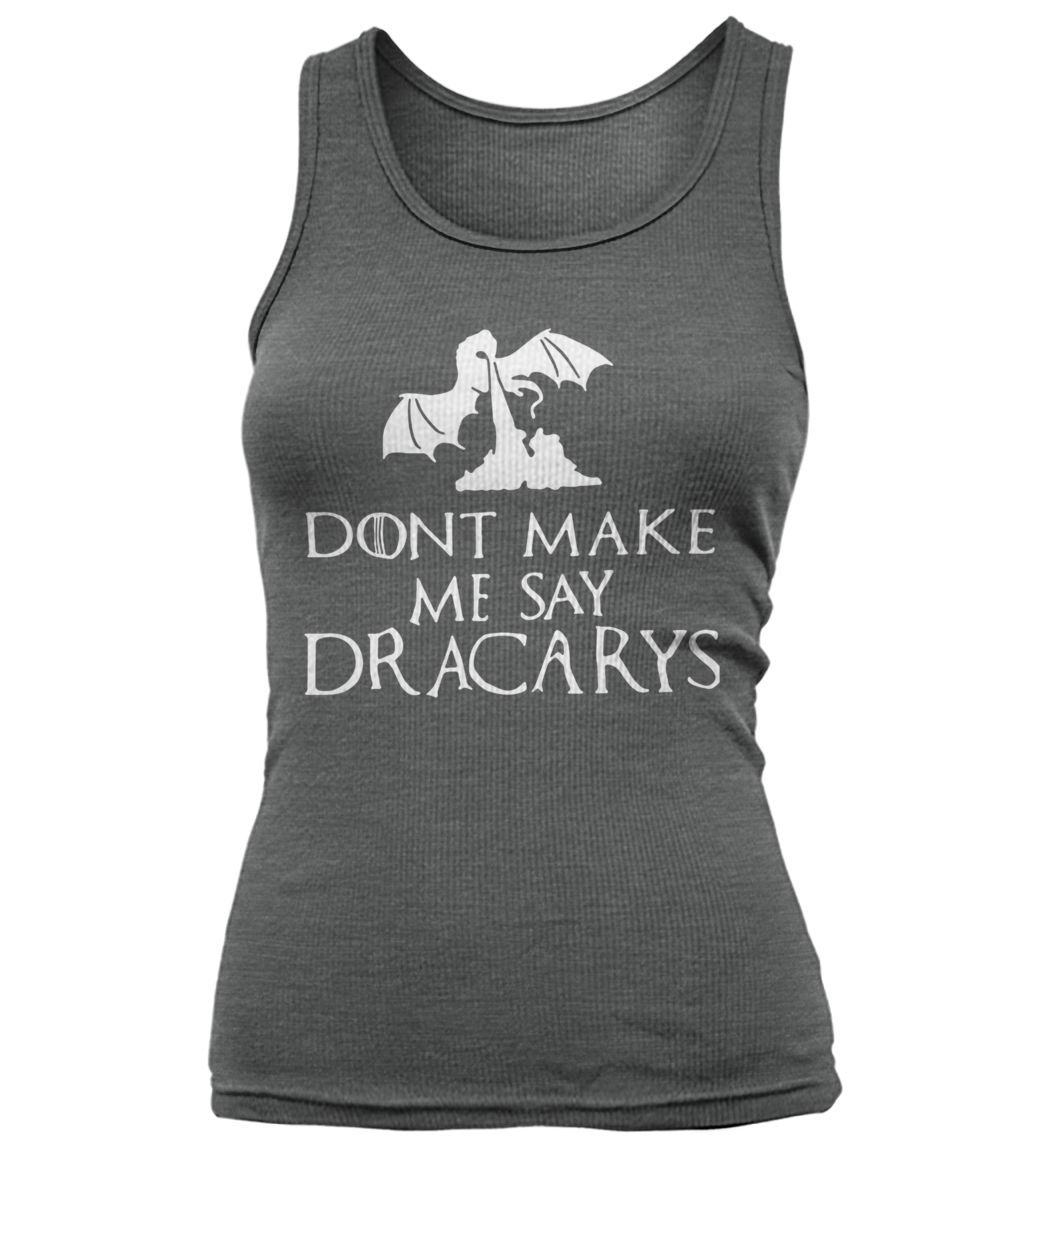 Game of thrones don't make me say dracarys women's tank top